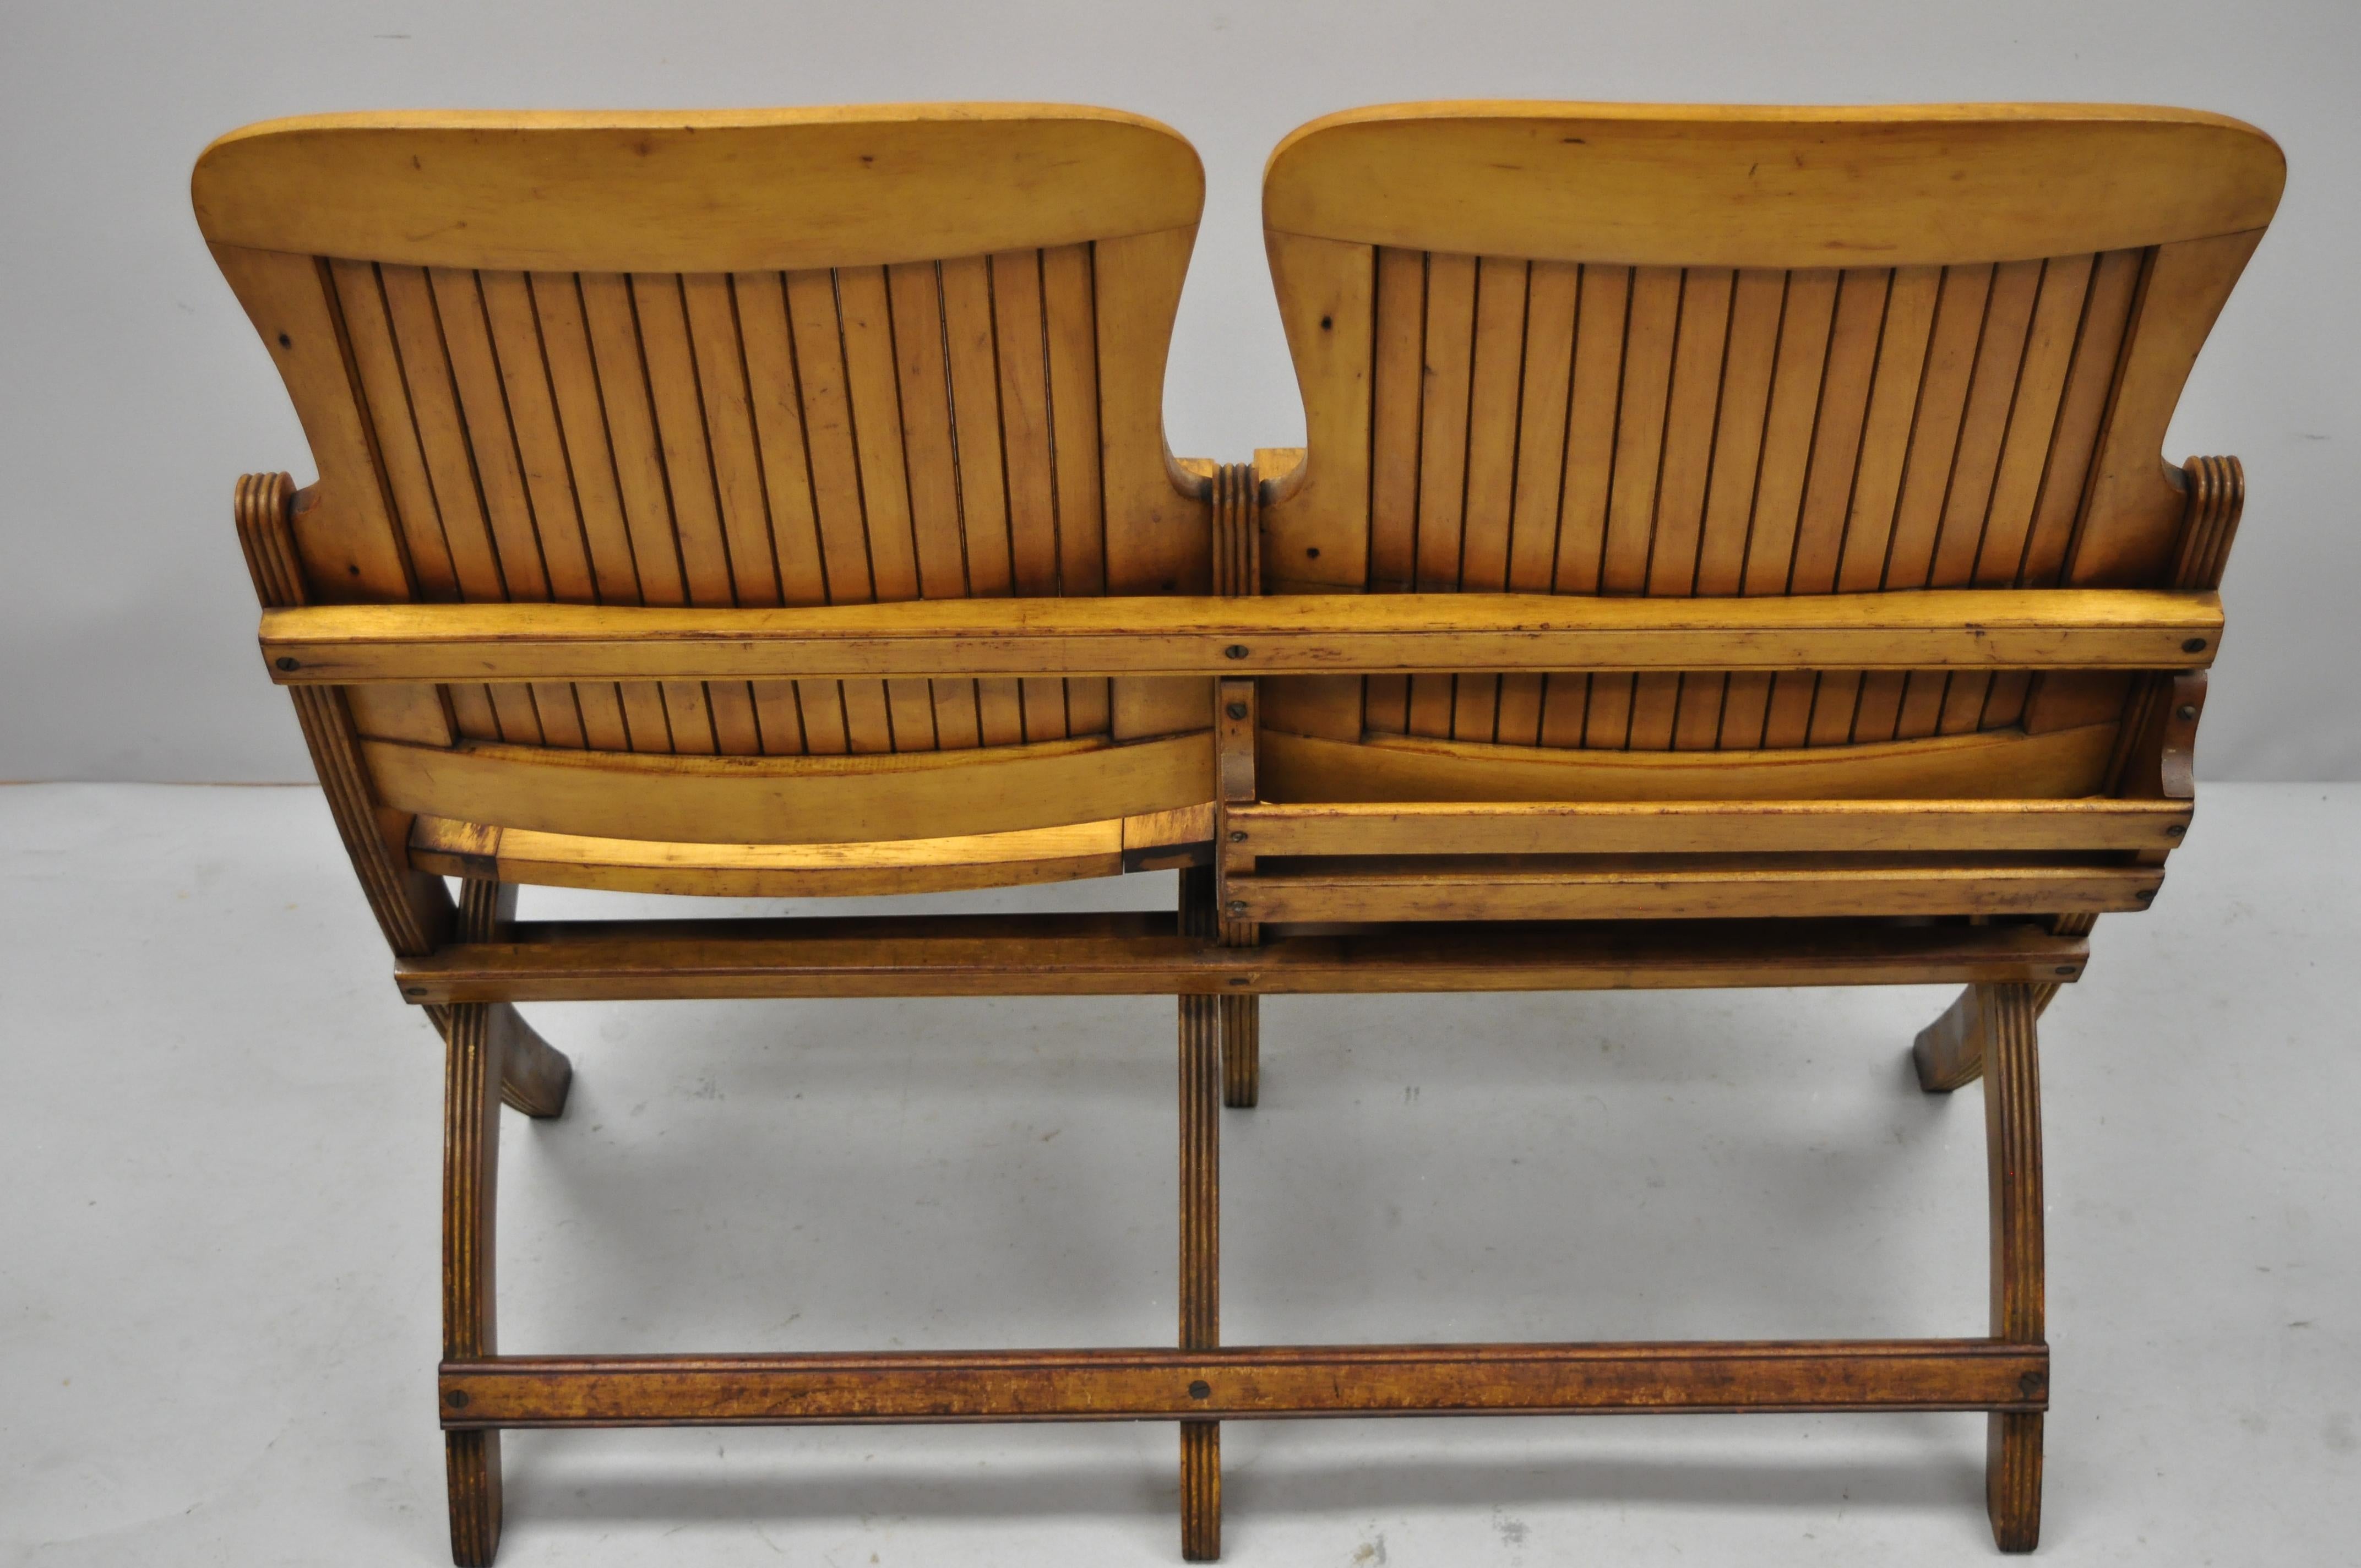 Mid-20th Century Antique Vintage Wood Slat Double Folding Seat Theater School Old Pew Chair